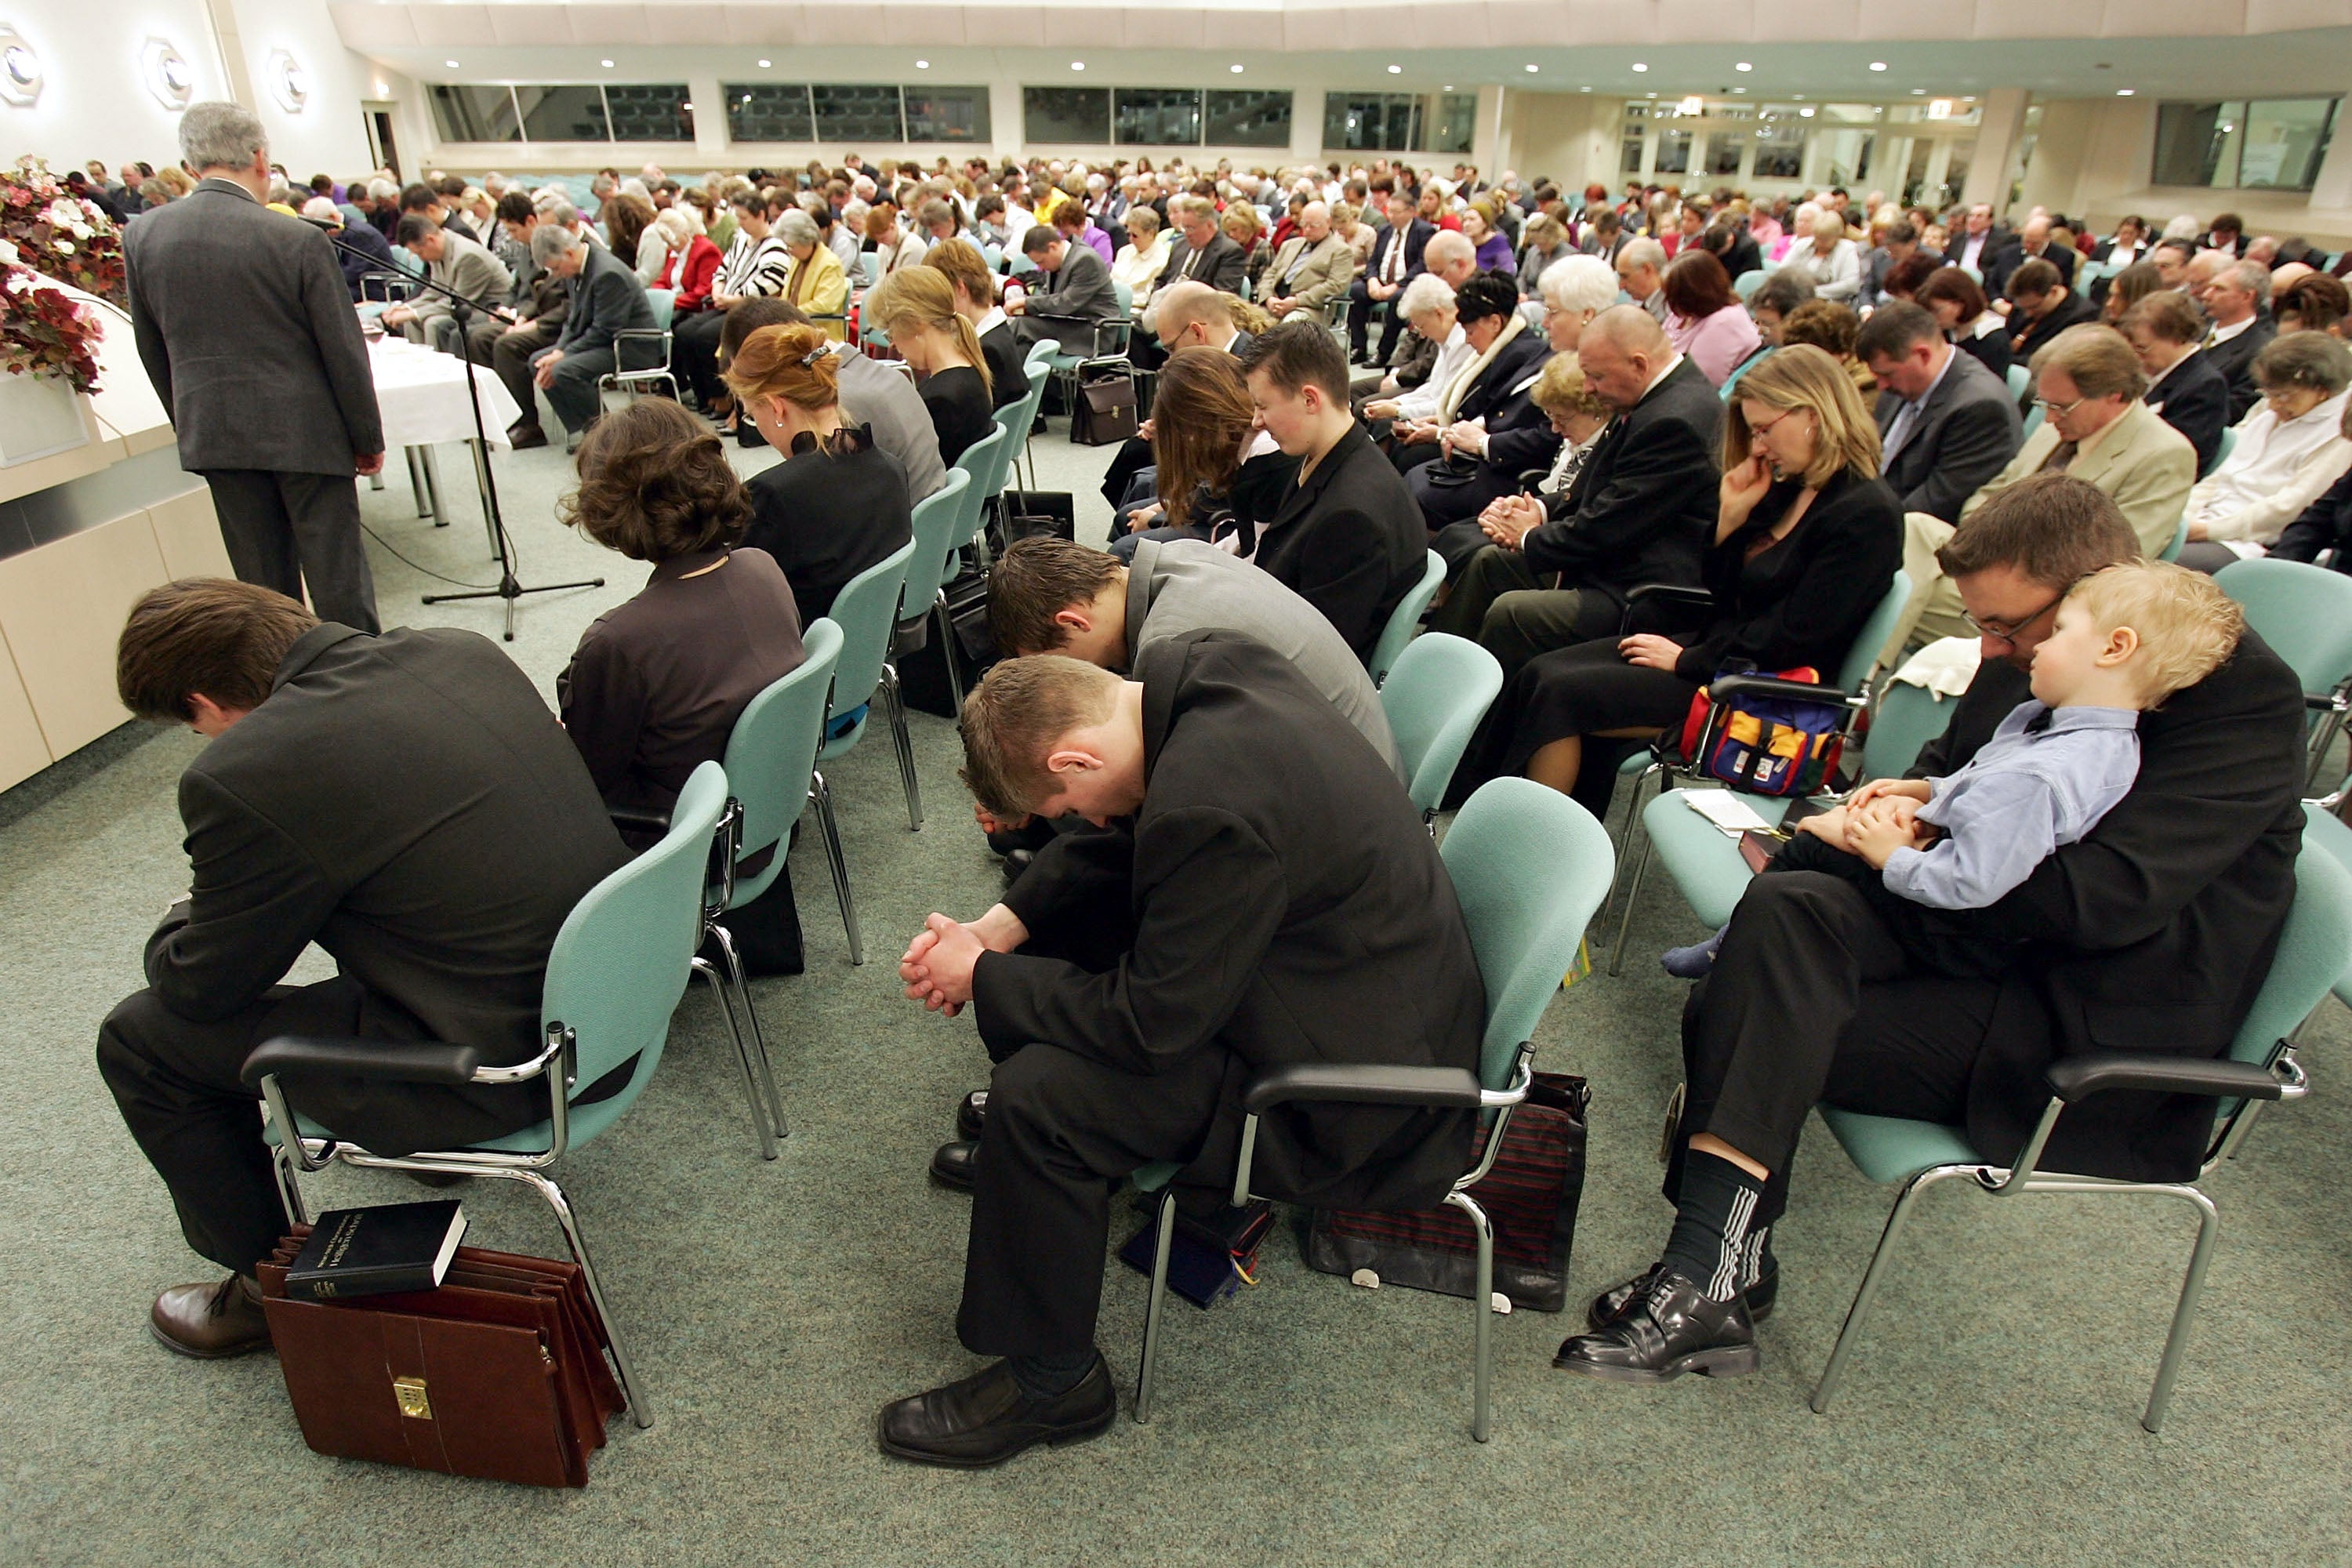 Members of the Jehova's Witnesses Church pray during a religious service